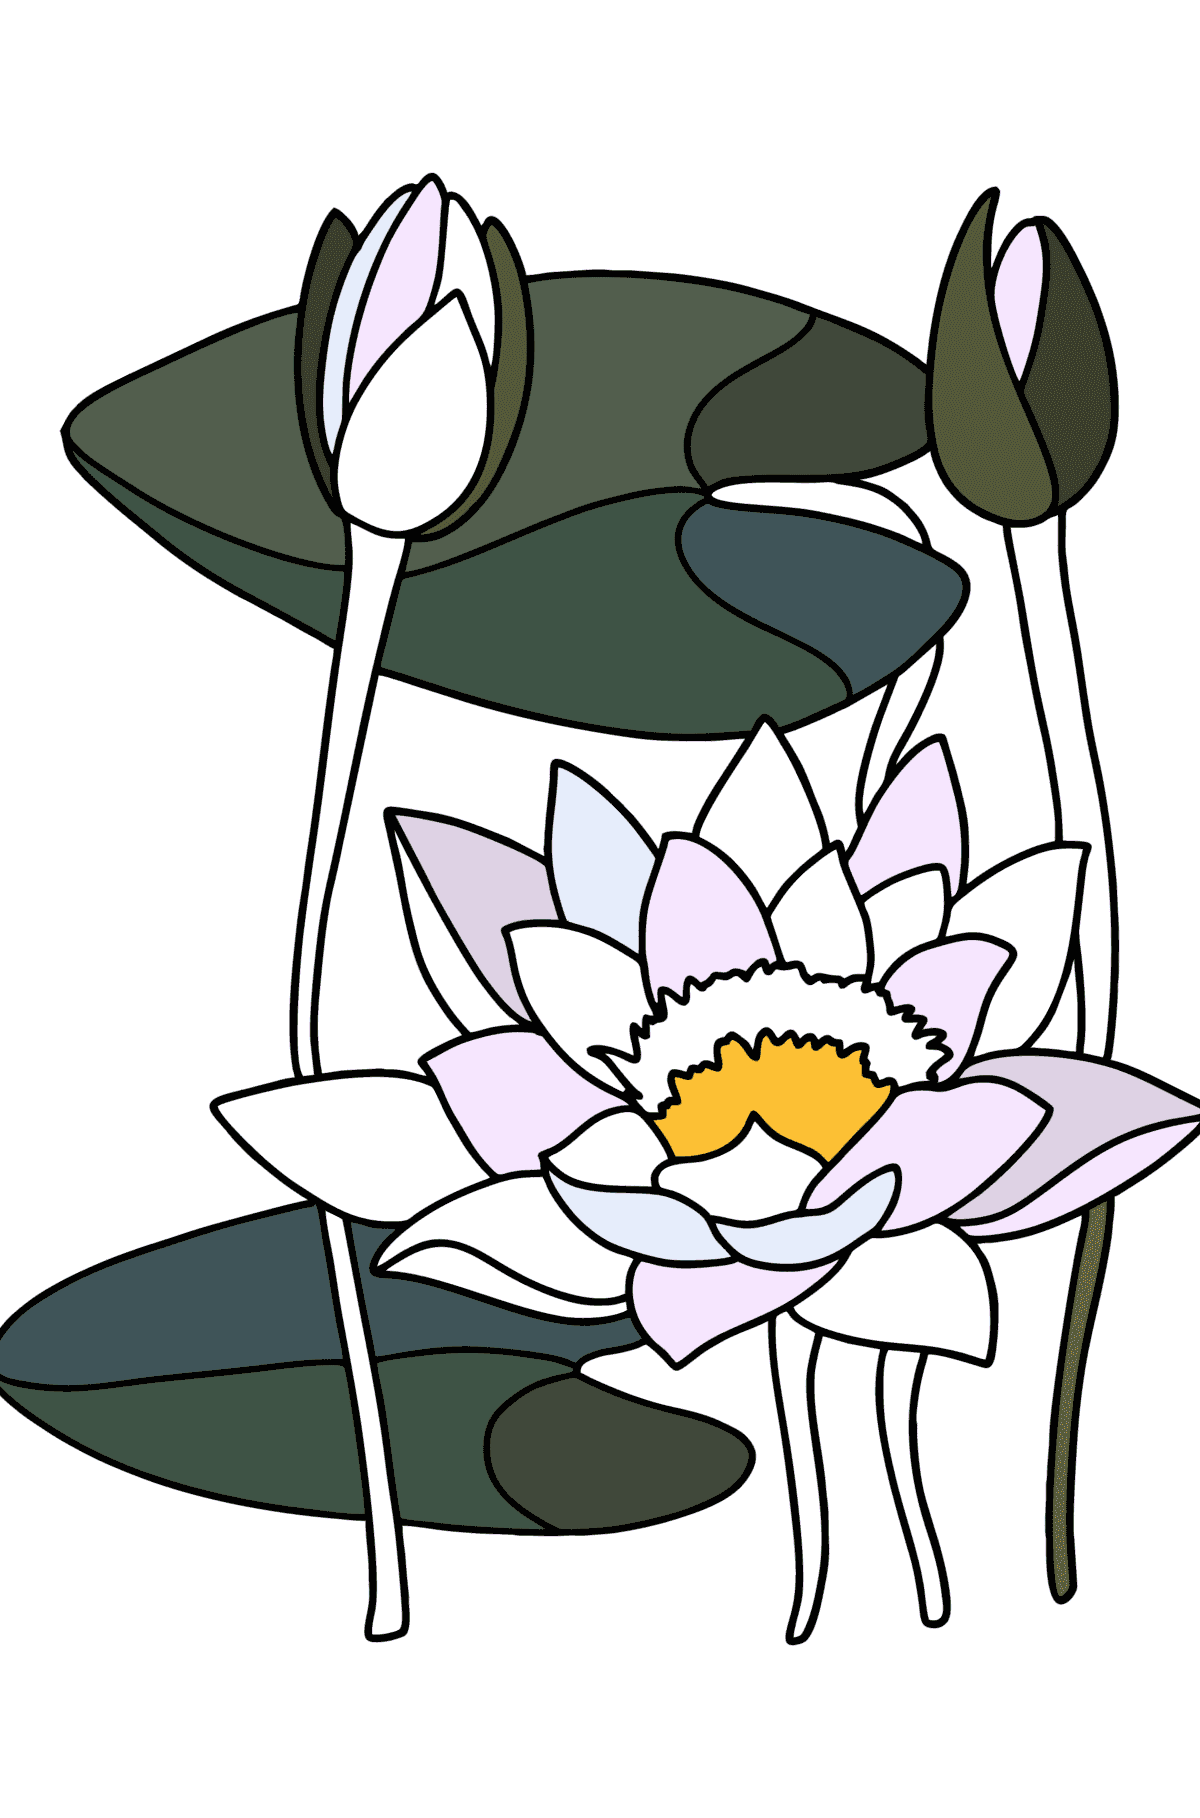 Water lily coloring page - Coloring Pages for Kids